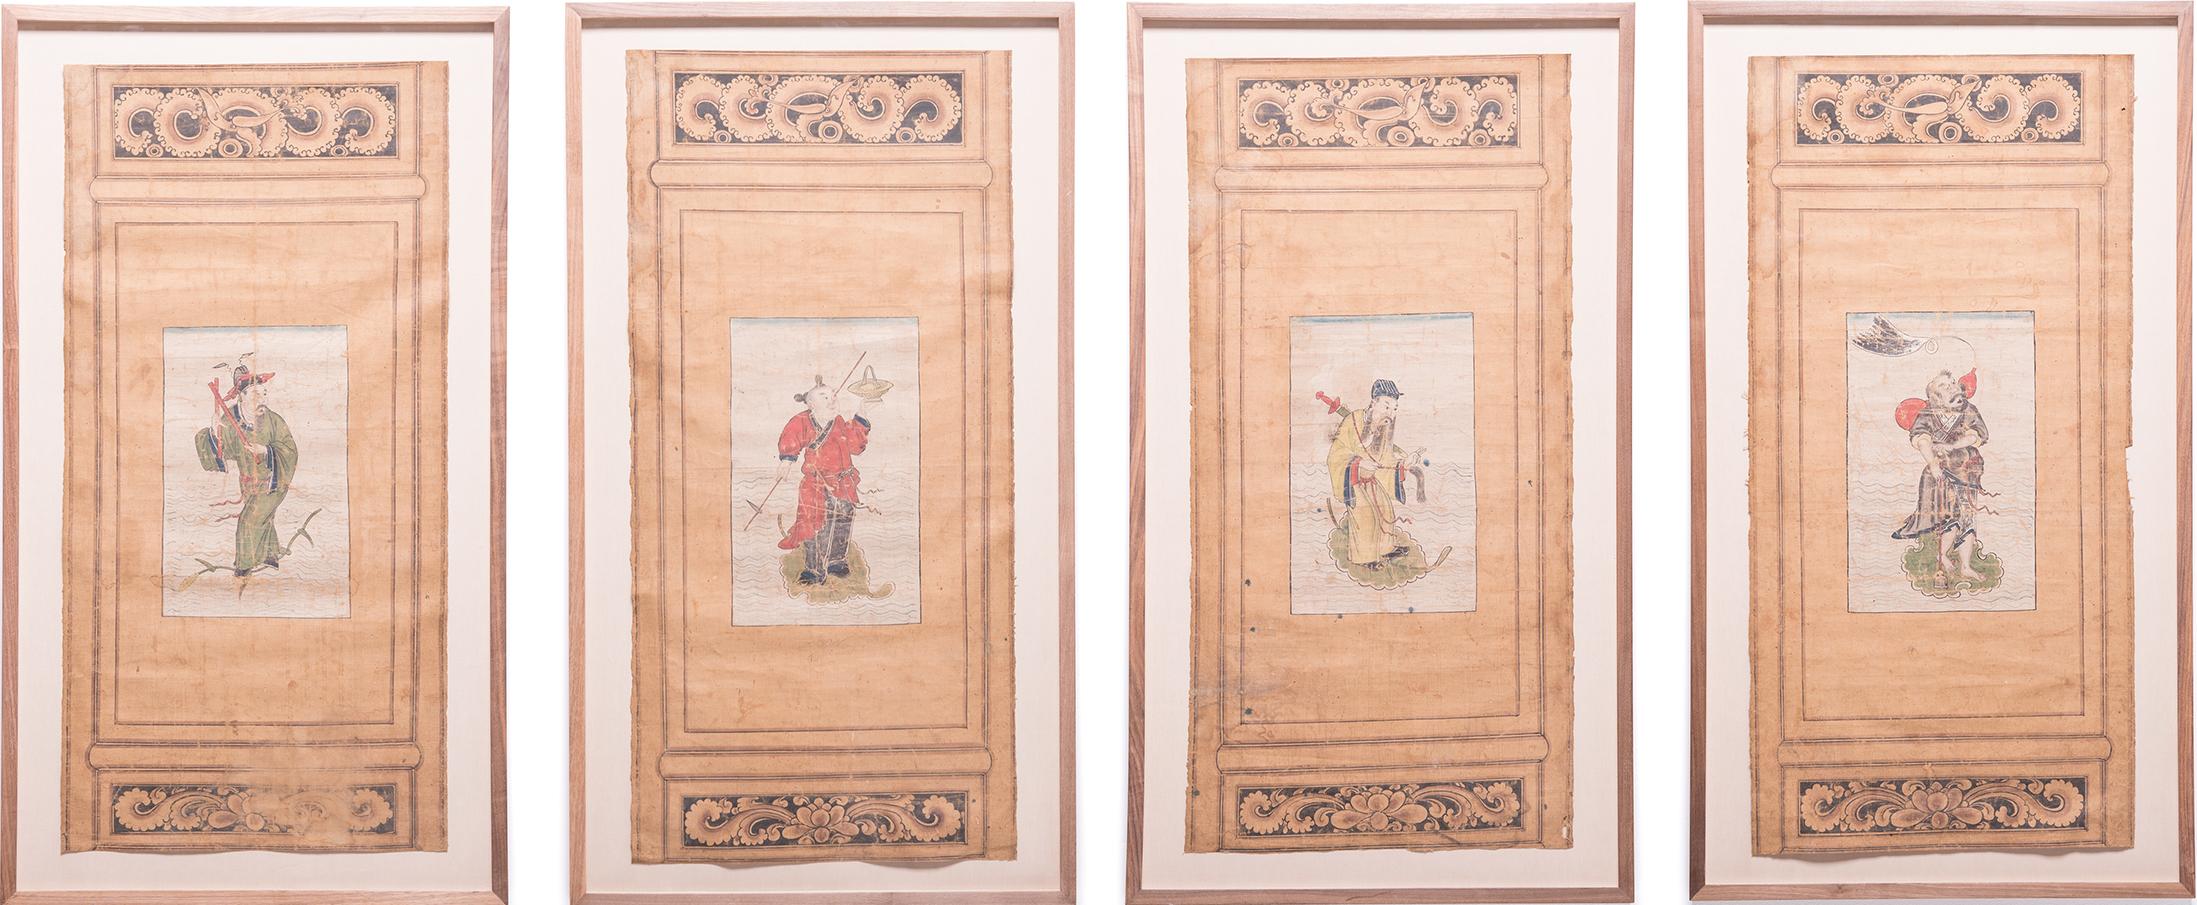 Set of Four Chinese Immortals Screen Paintings, c. 1850